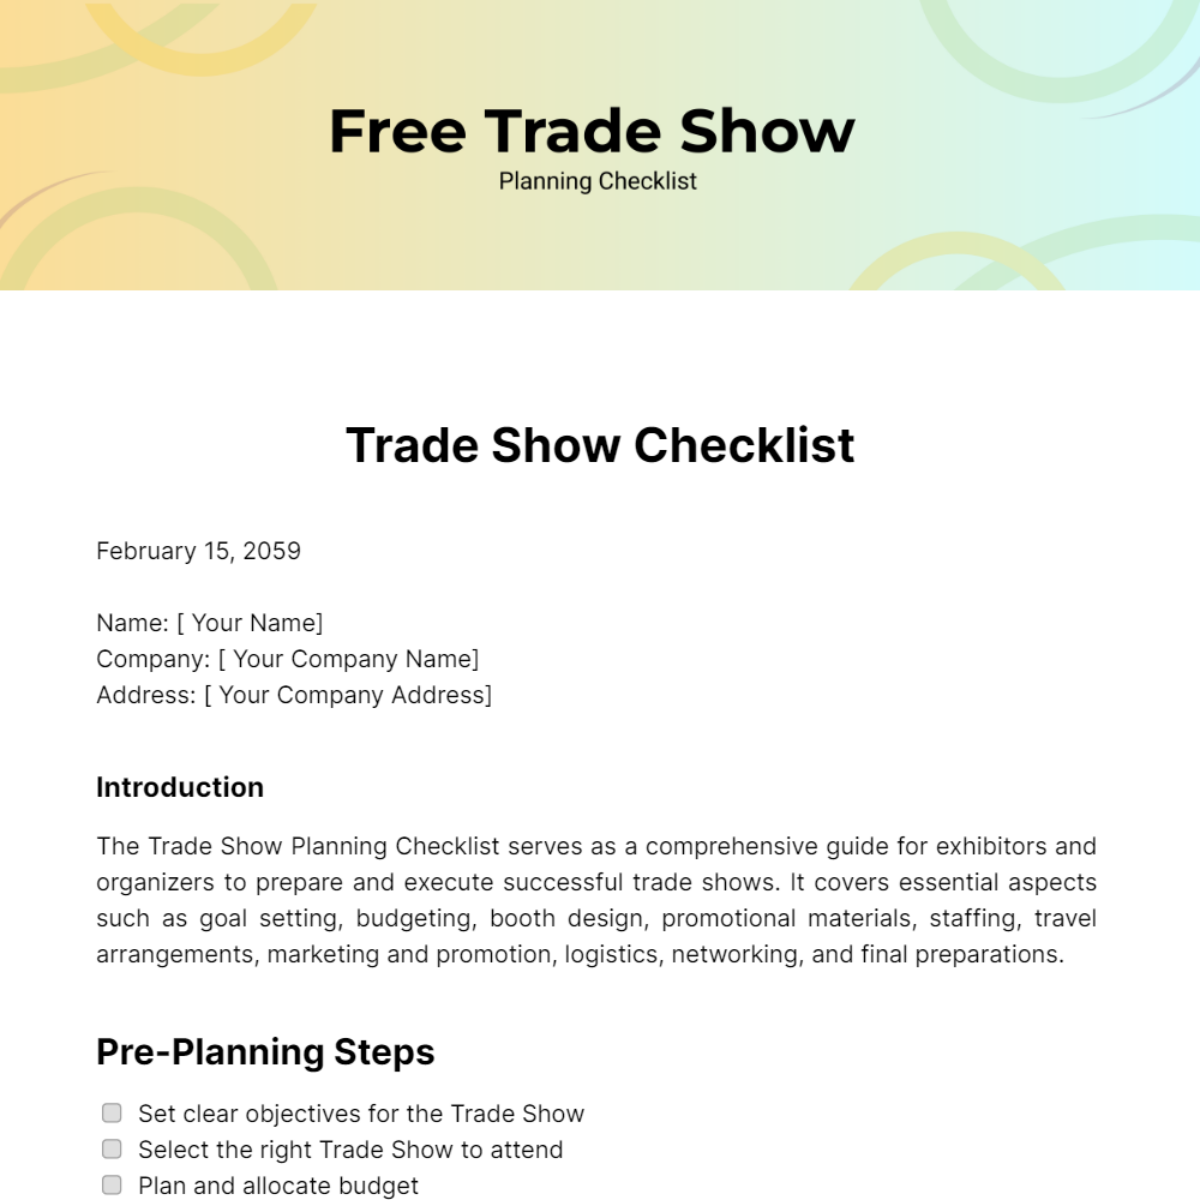 Free Trade Show Planning Checklist Template